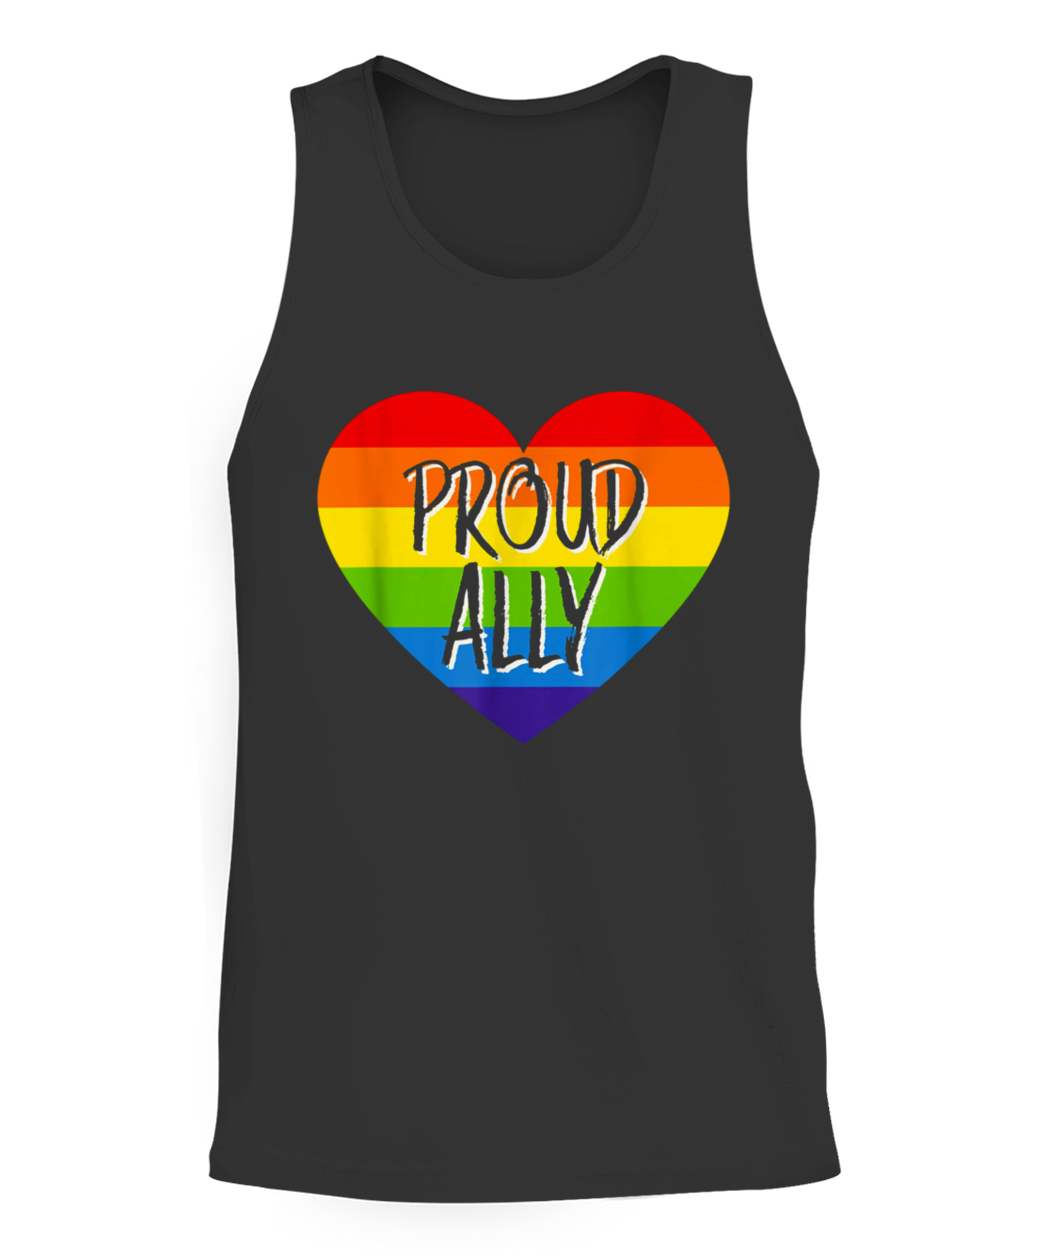 PROUD ALLY RAINBOW FLAG GAY PRIDE MONTH SUPPORT SHIRT - Ellie Shirt